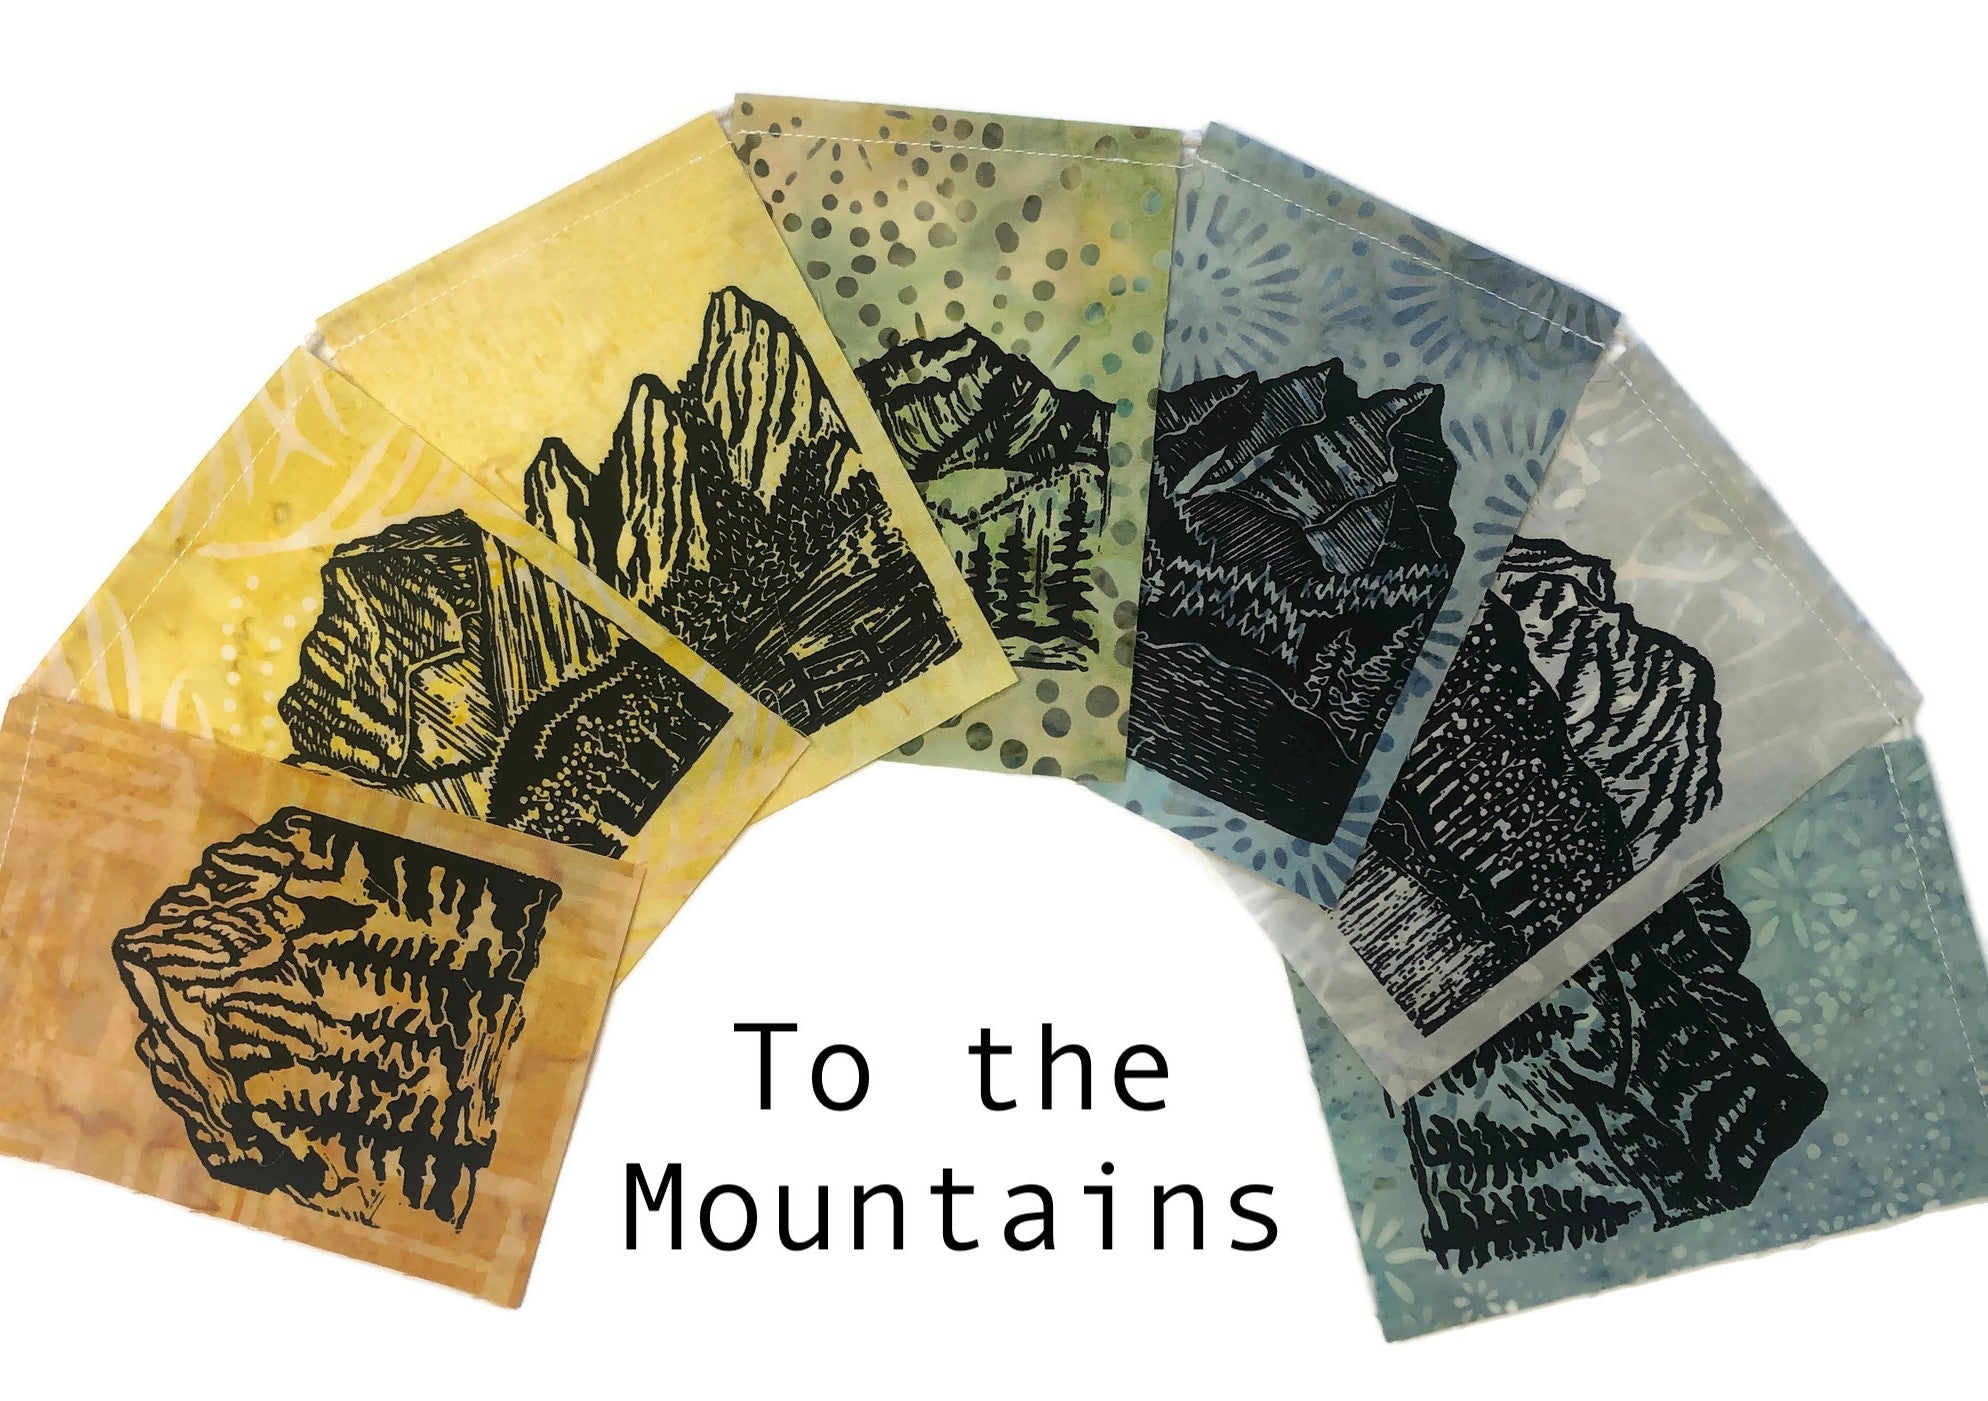 Small Flag Set with images of Mountains handprinted on them